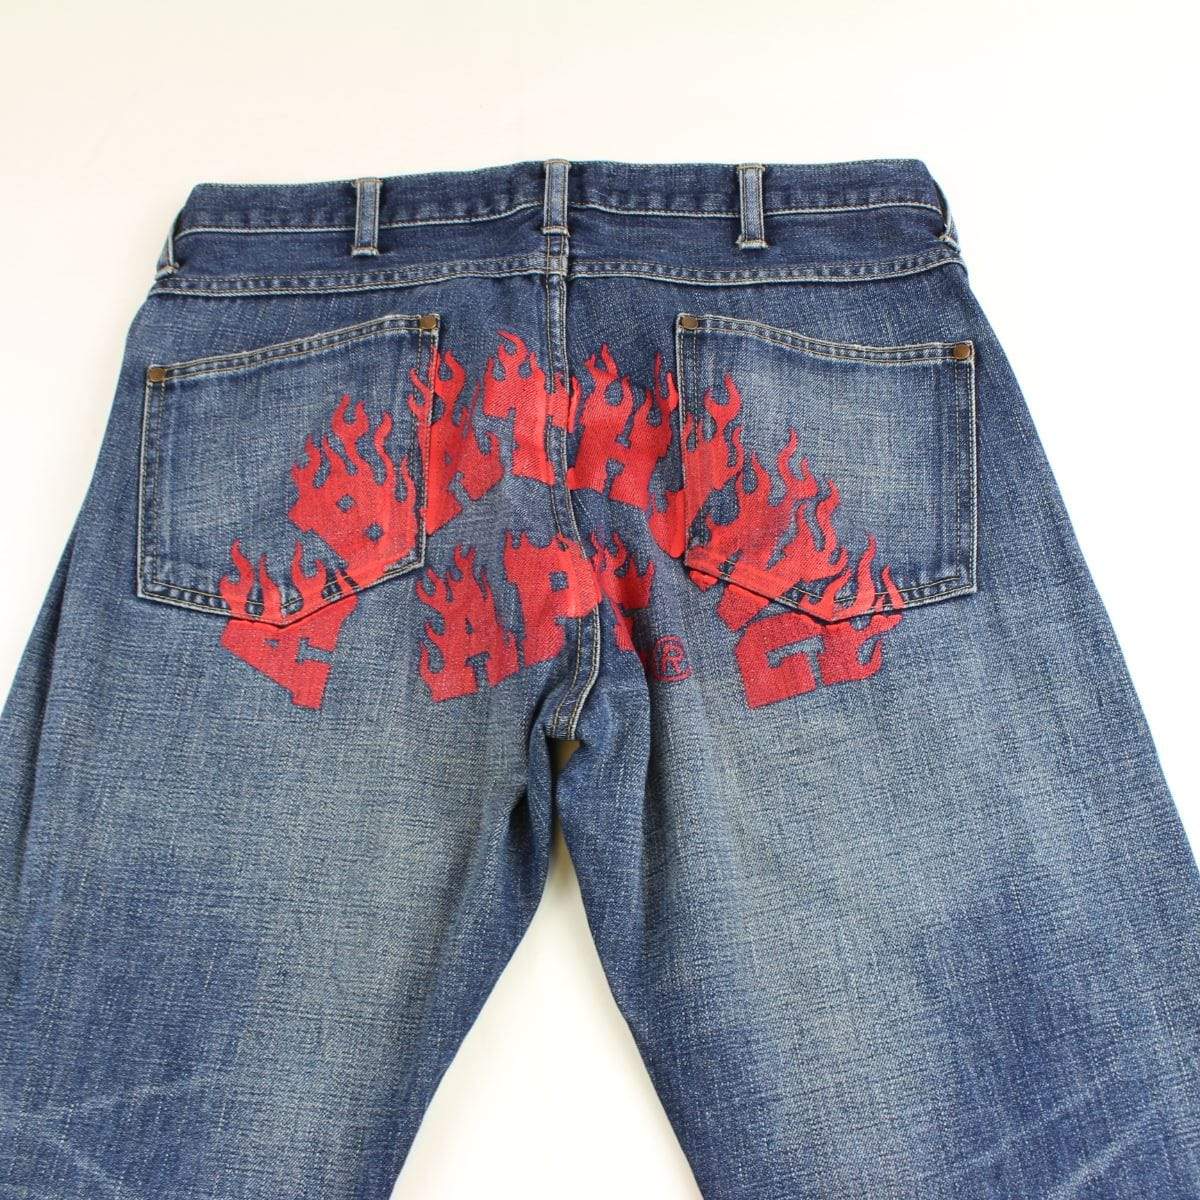 Bape Red Flame Text Jeans - SaruGeneral